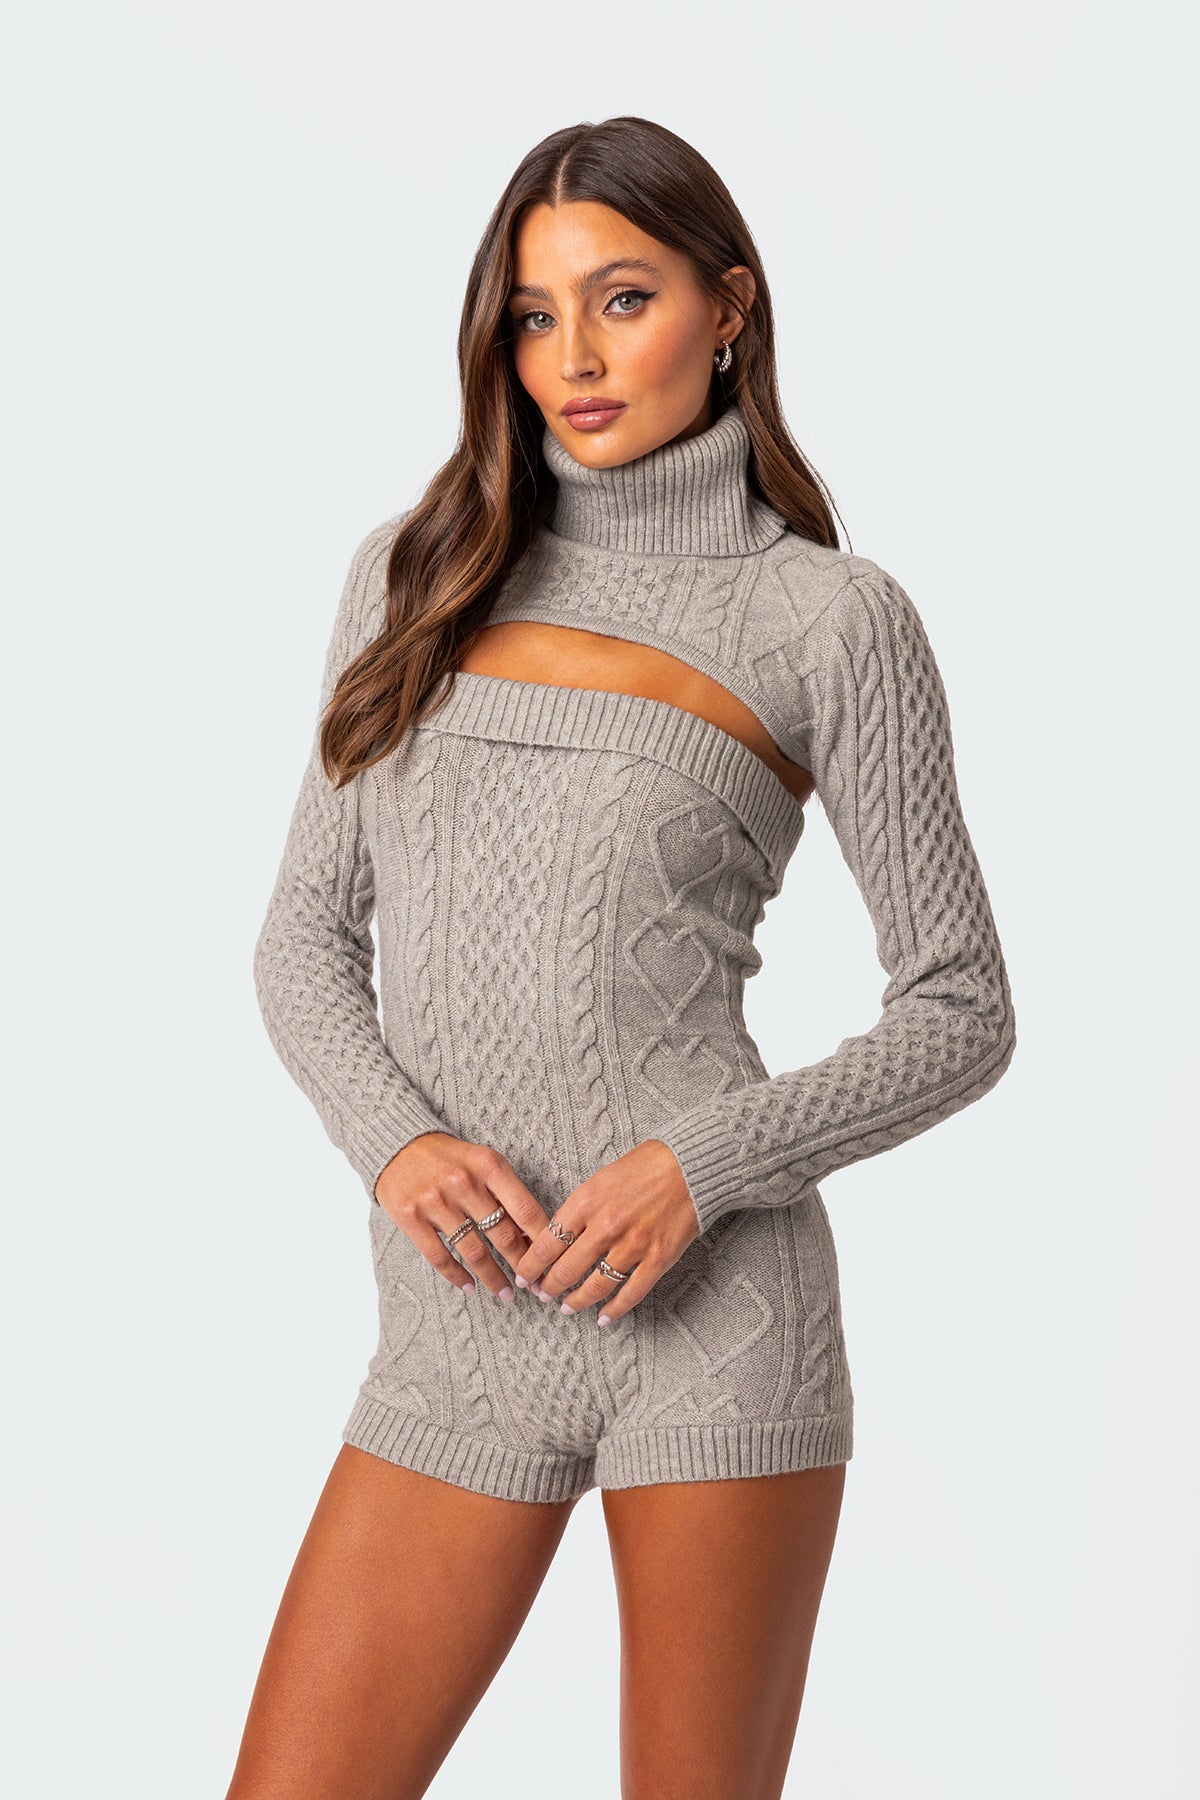 Finnley Two Piece Cable Knit Romper